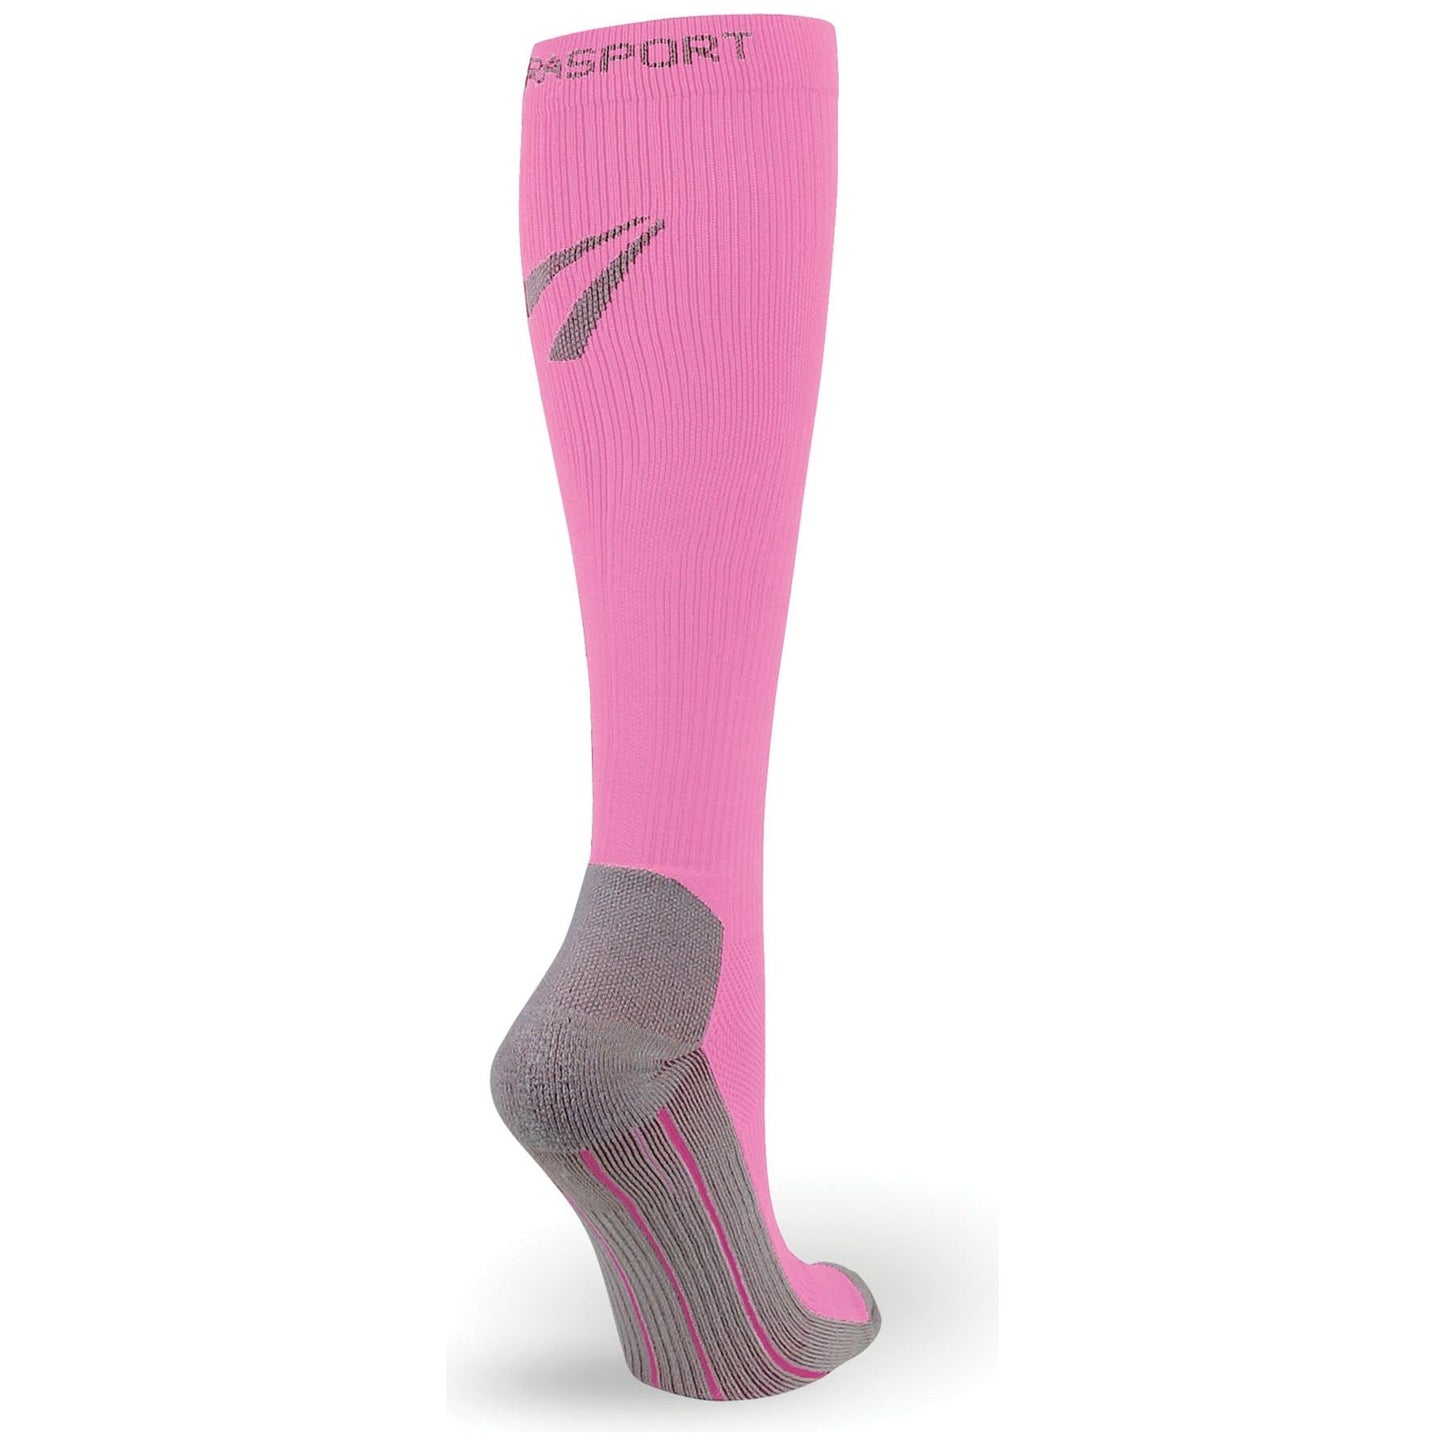 15-20 mmHg Compression Recovery Sock